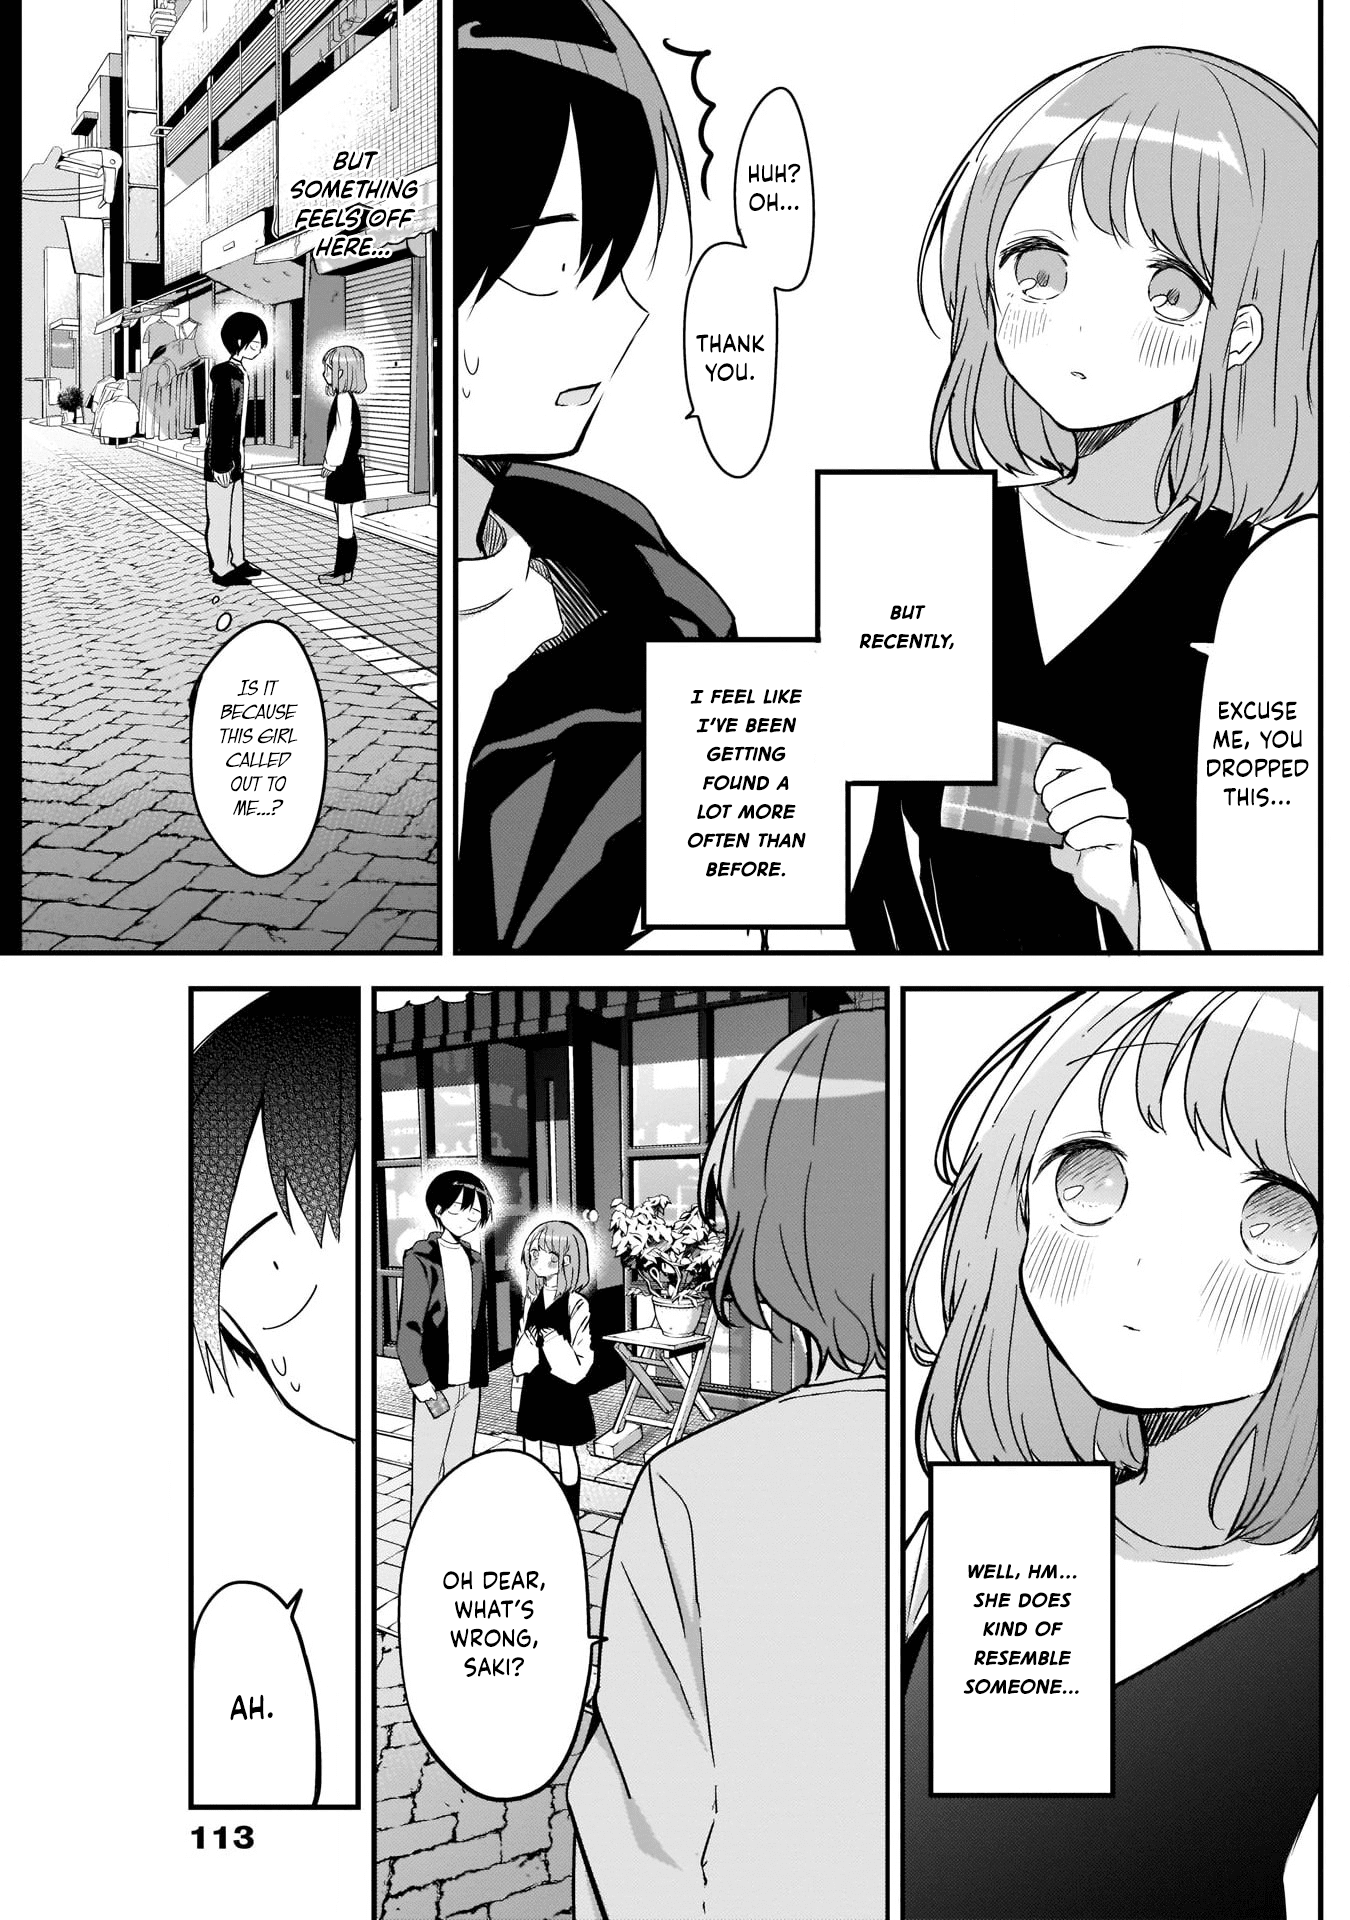 Kubo-San Doesn't Leave Me Be (A Mob) - Page 3